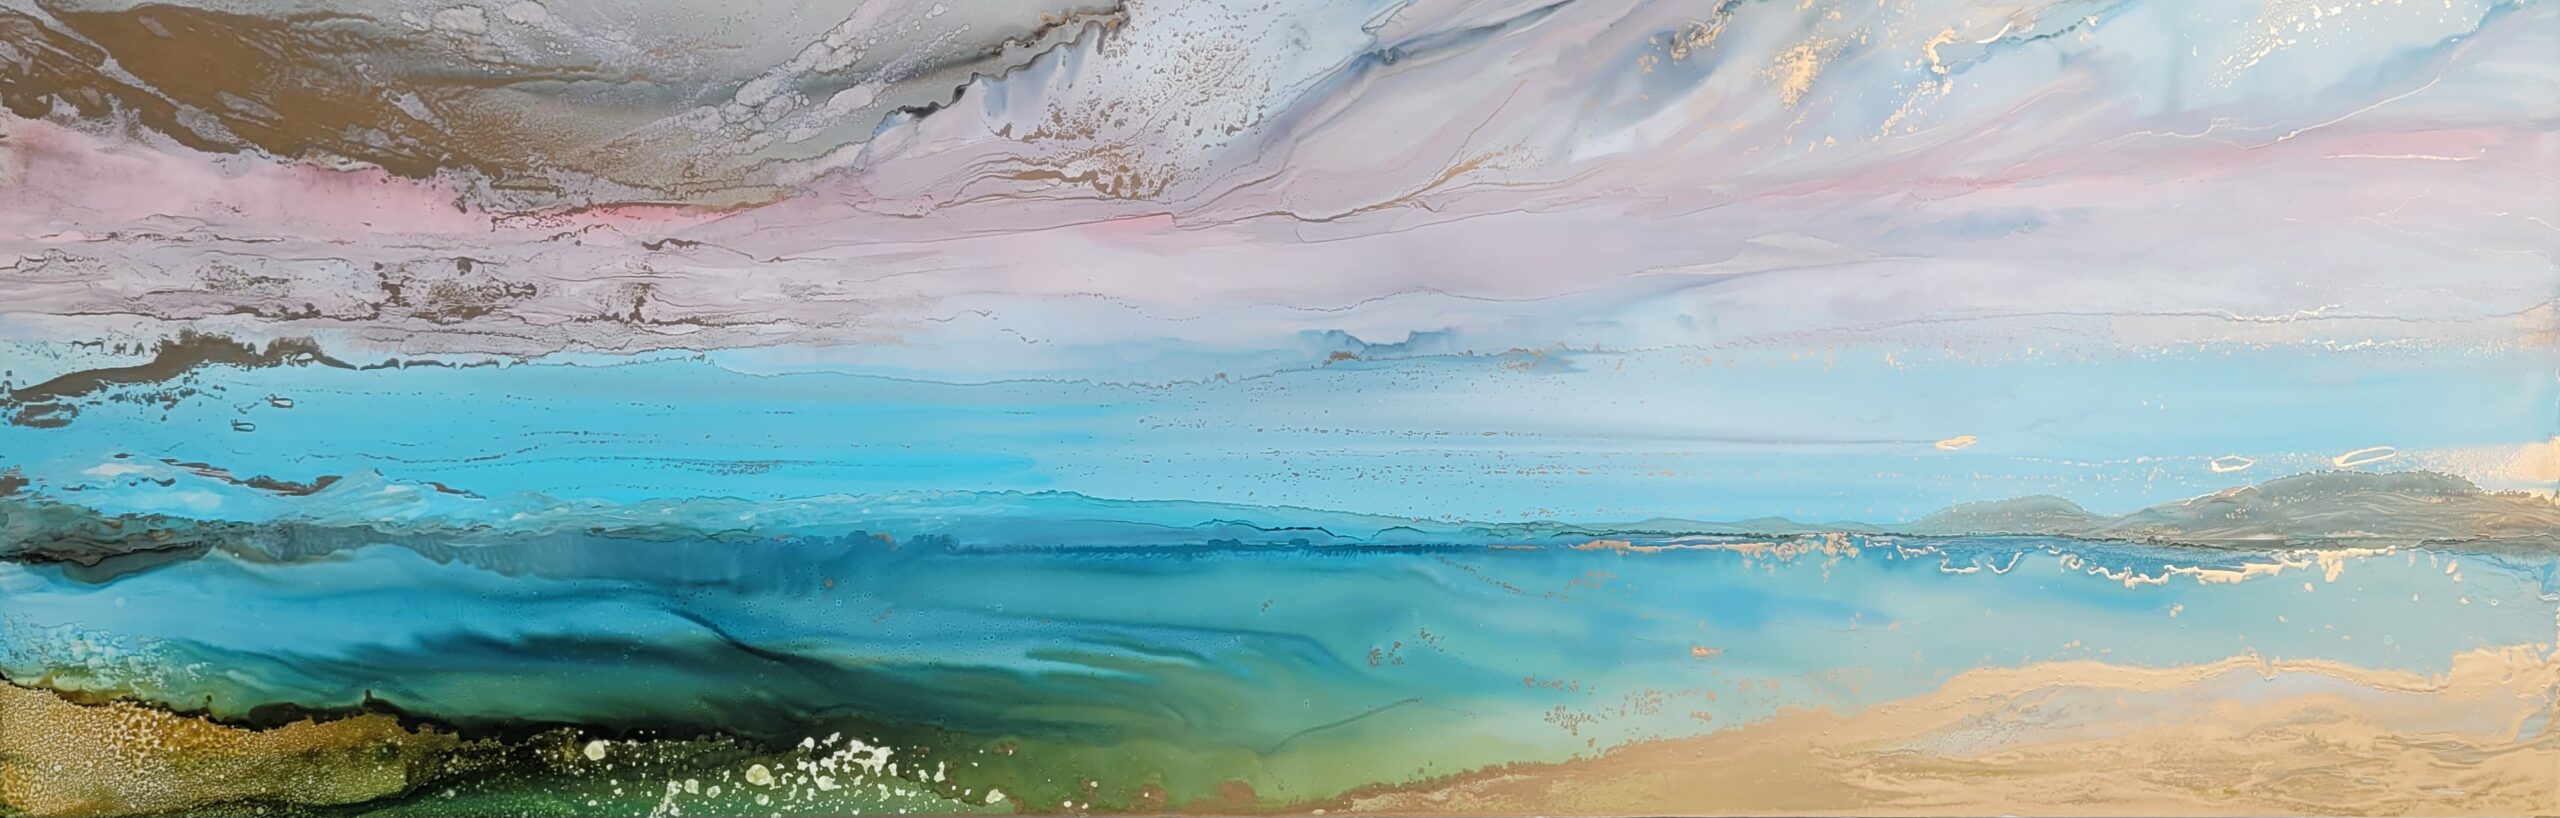 Calm Within, original alcohol ink abstract landscape painting by Paulina Tokarski at Effusion Art Gallery in Invermere, BC